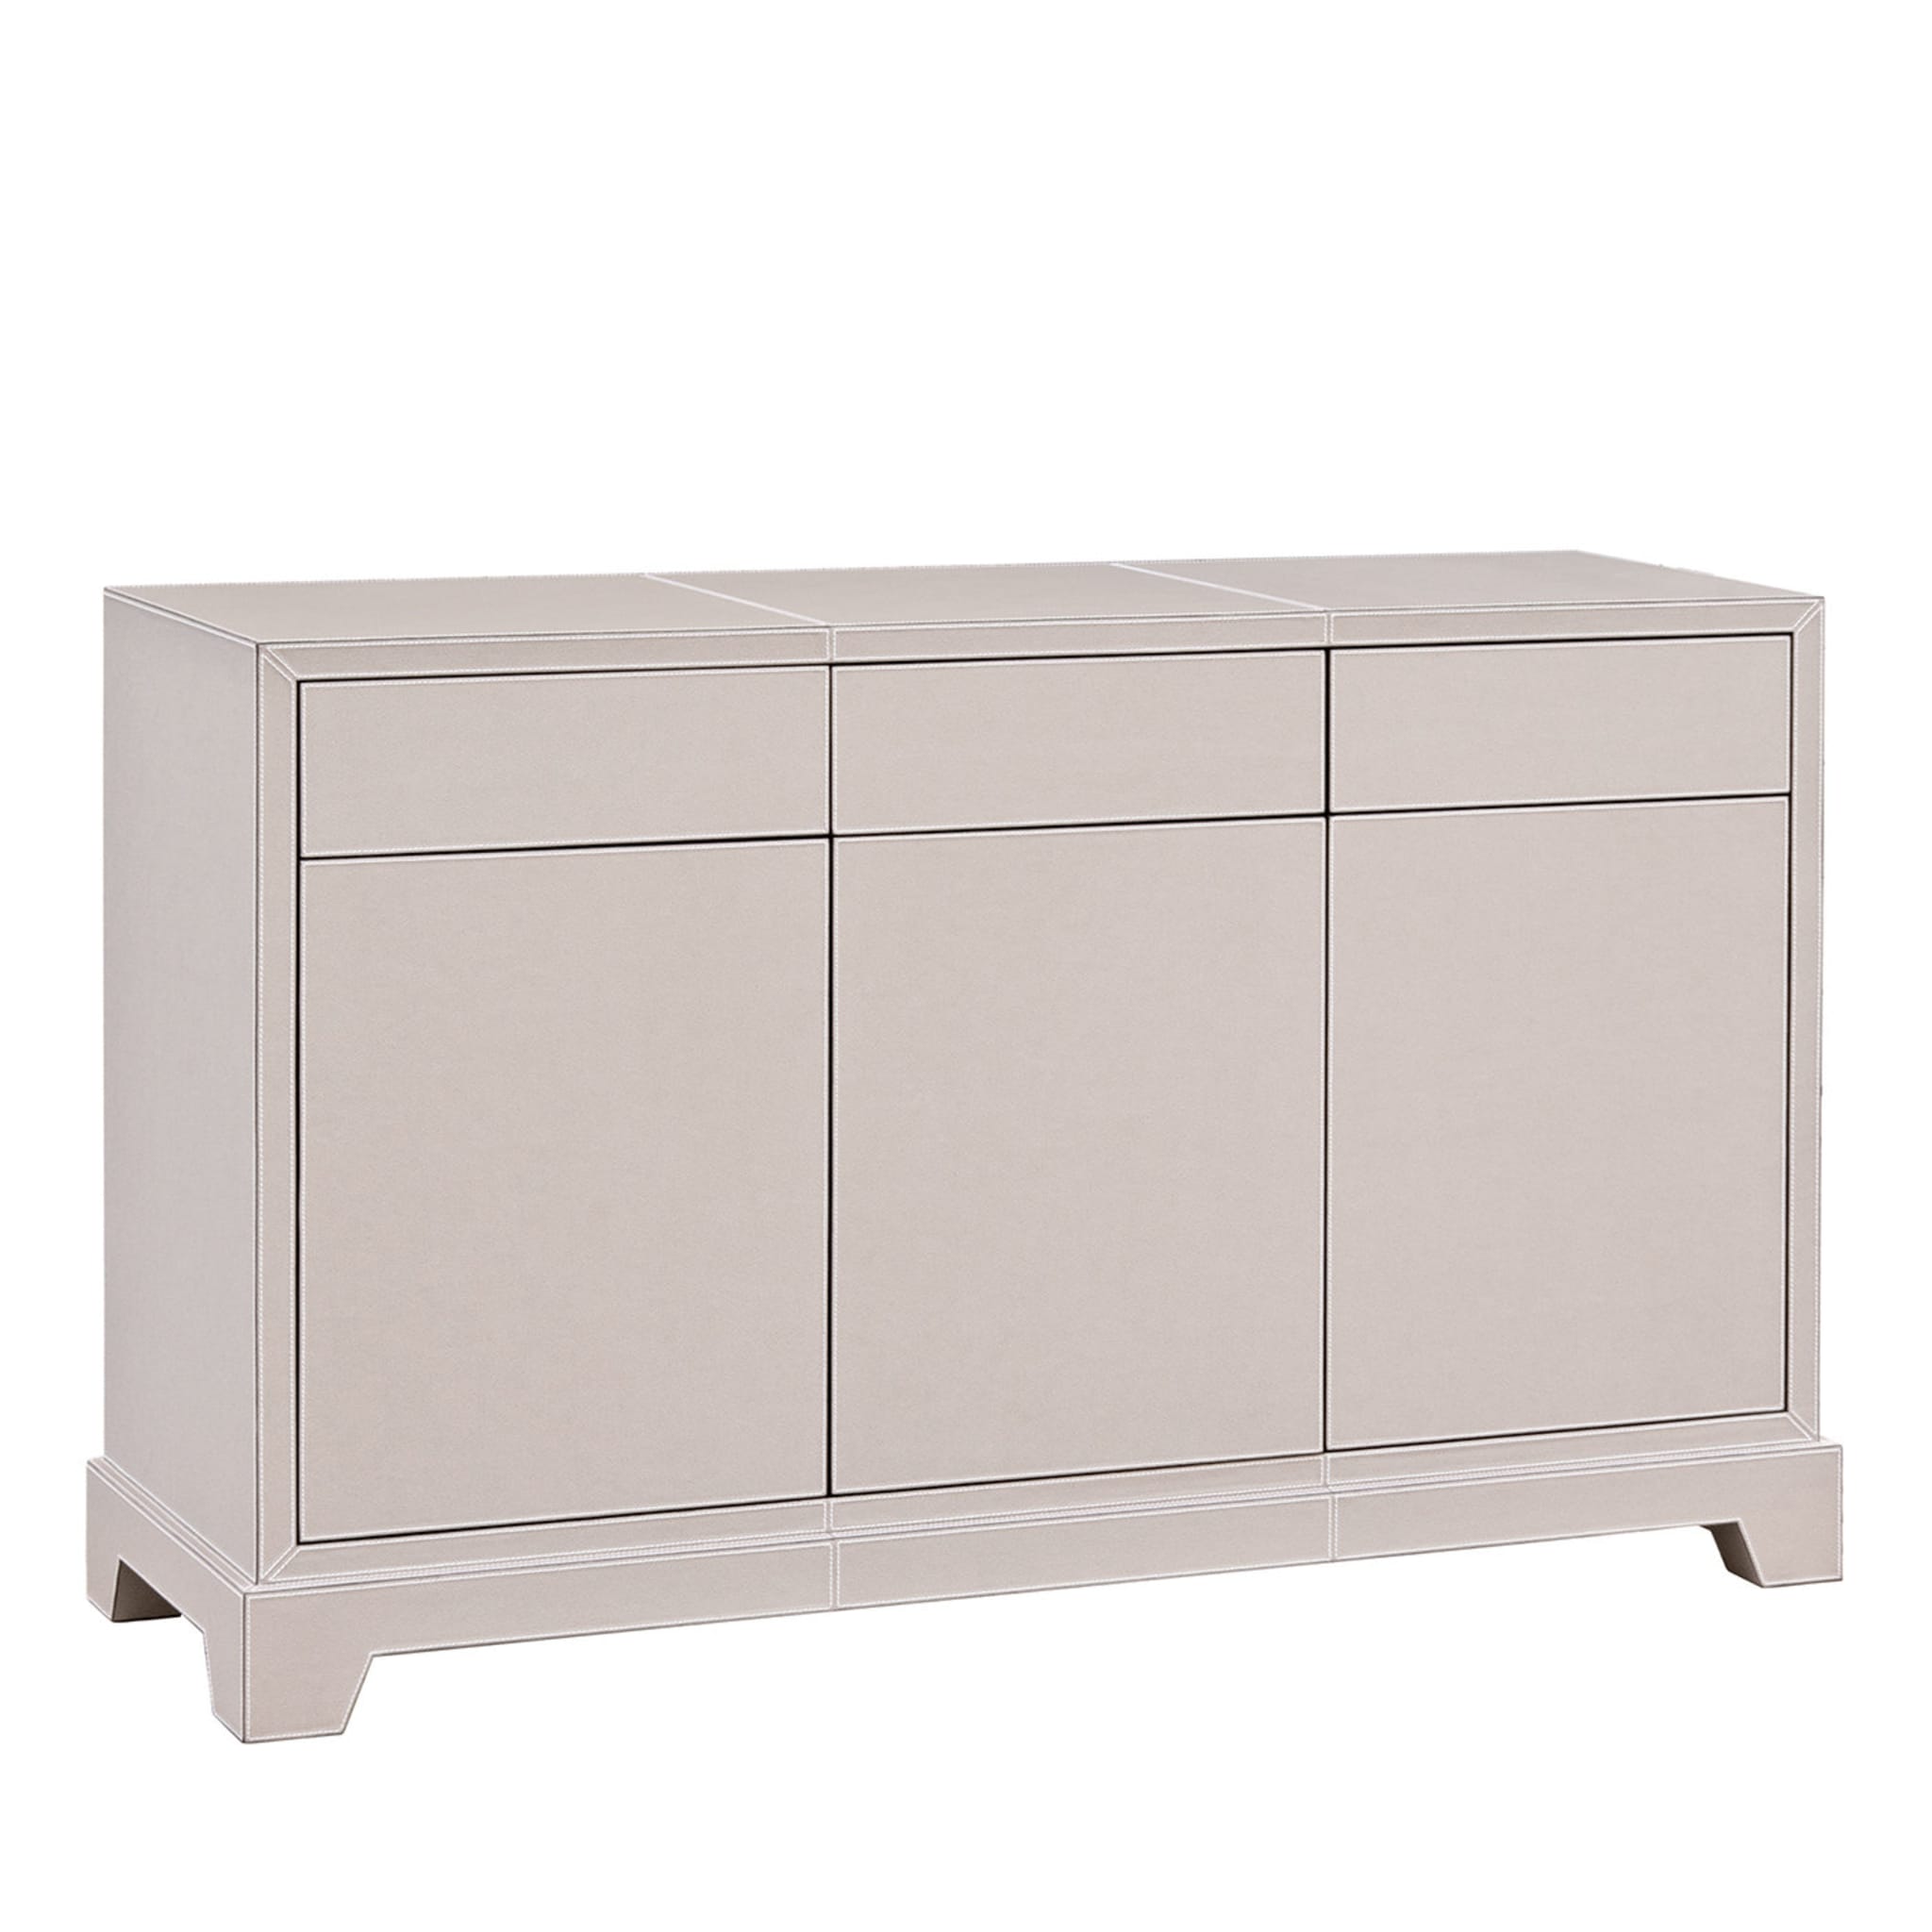 Giotto 3 Doors & 3 Drawers Cabinet - Main view